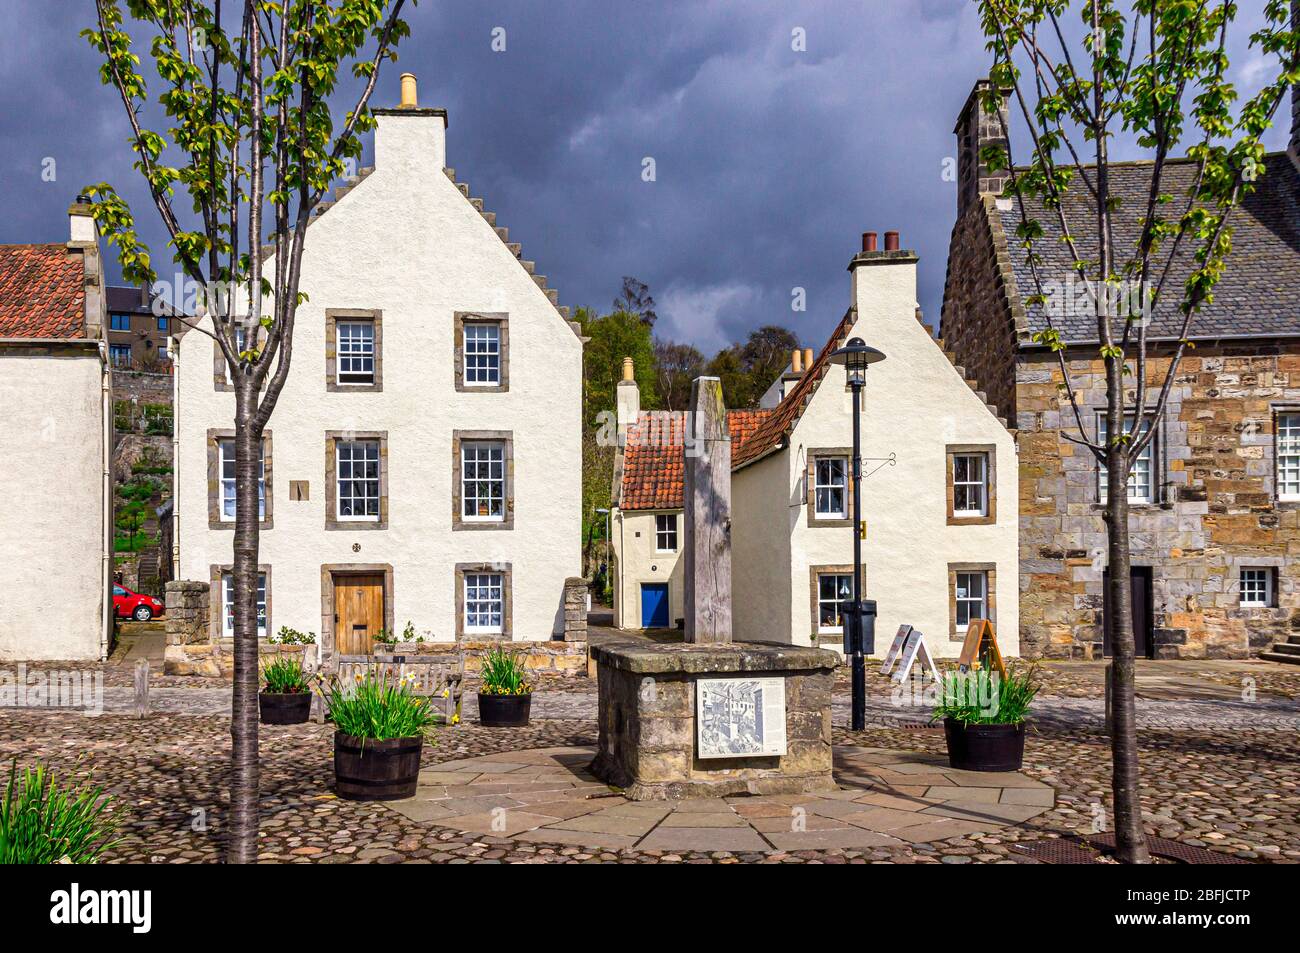 The remnants of The Tron (a weighbeam) at The town square and corner of Town House in the Royal Burgh of Culross Fife Scotland Stock Photo